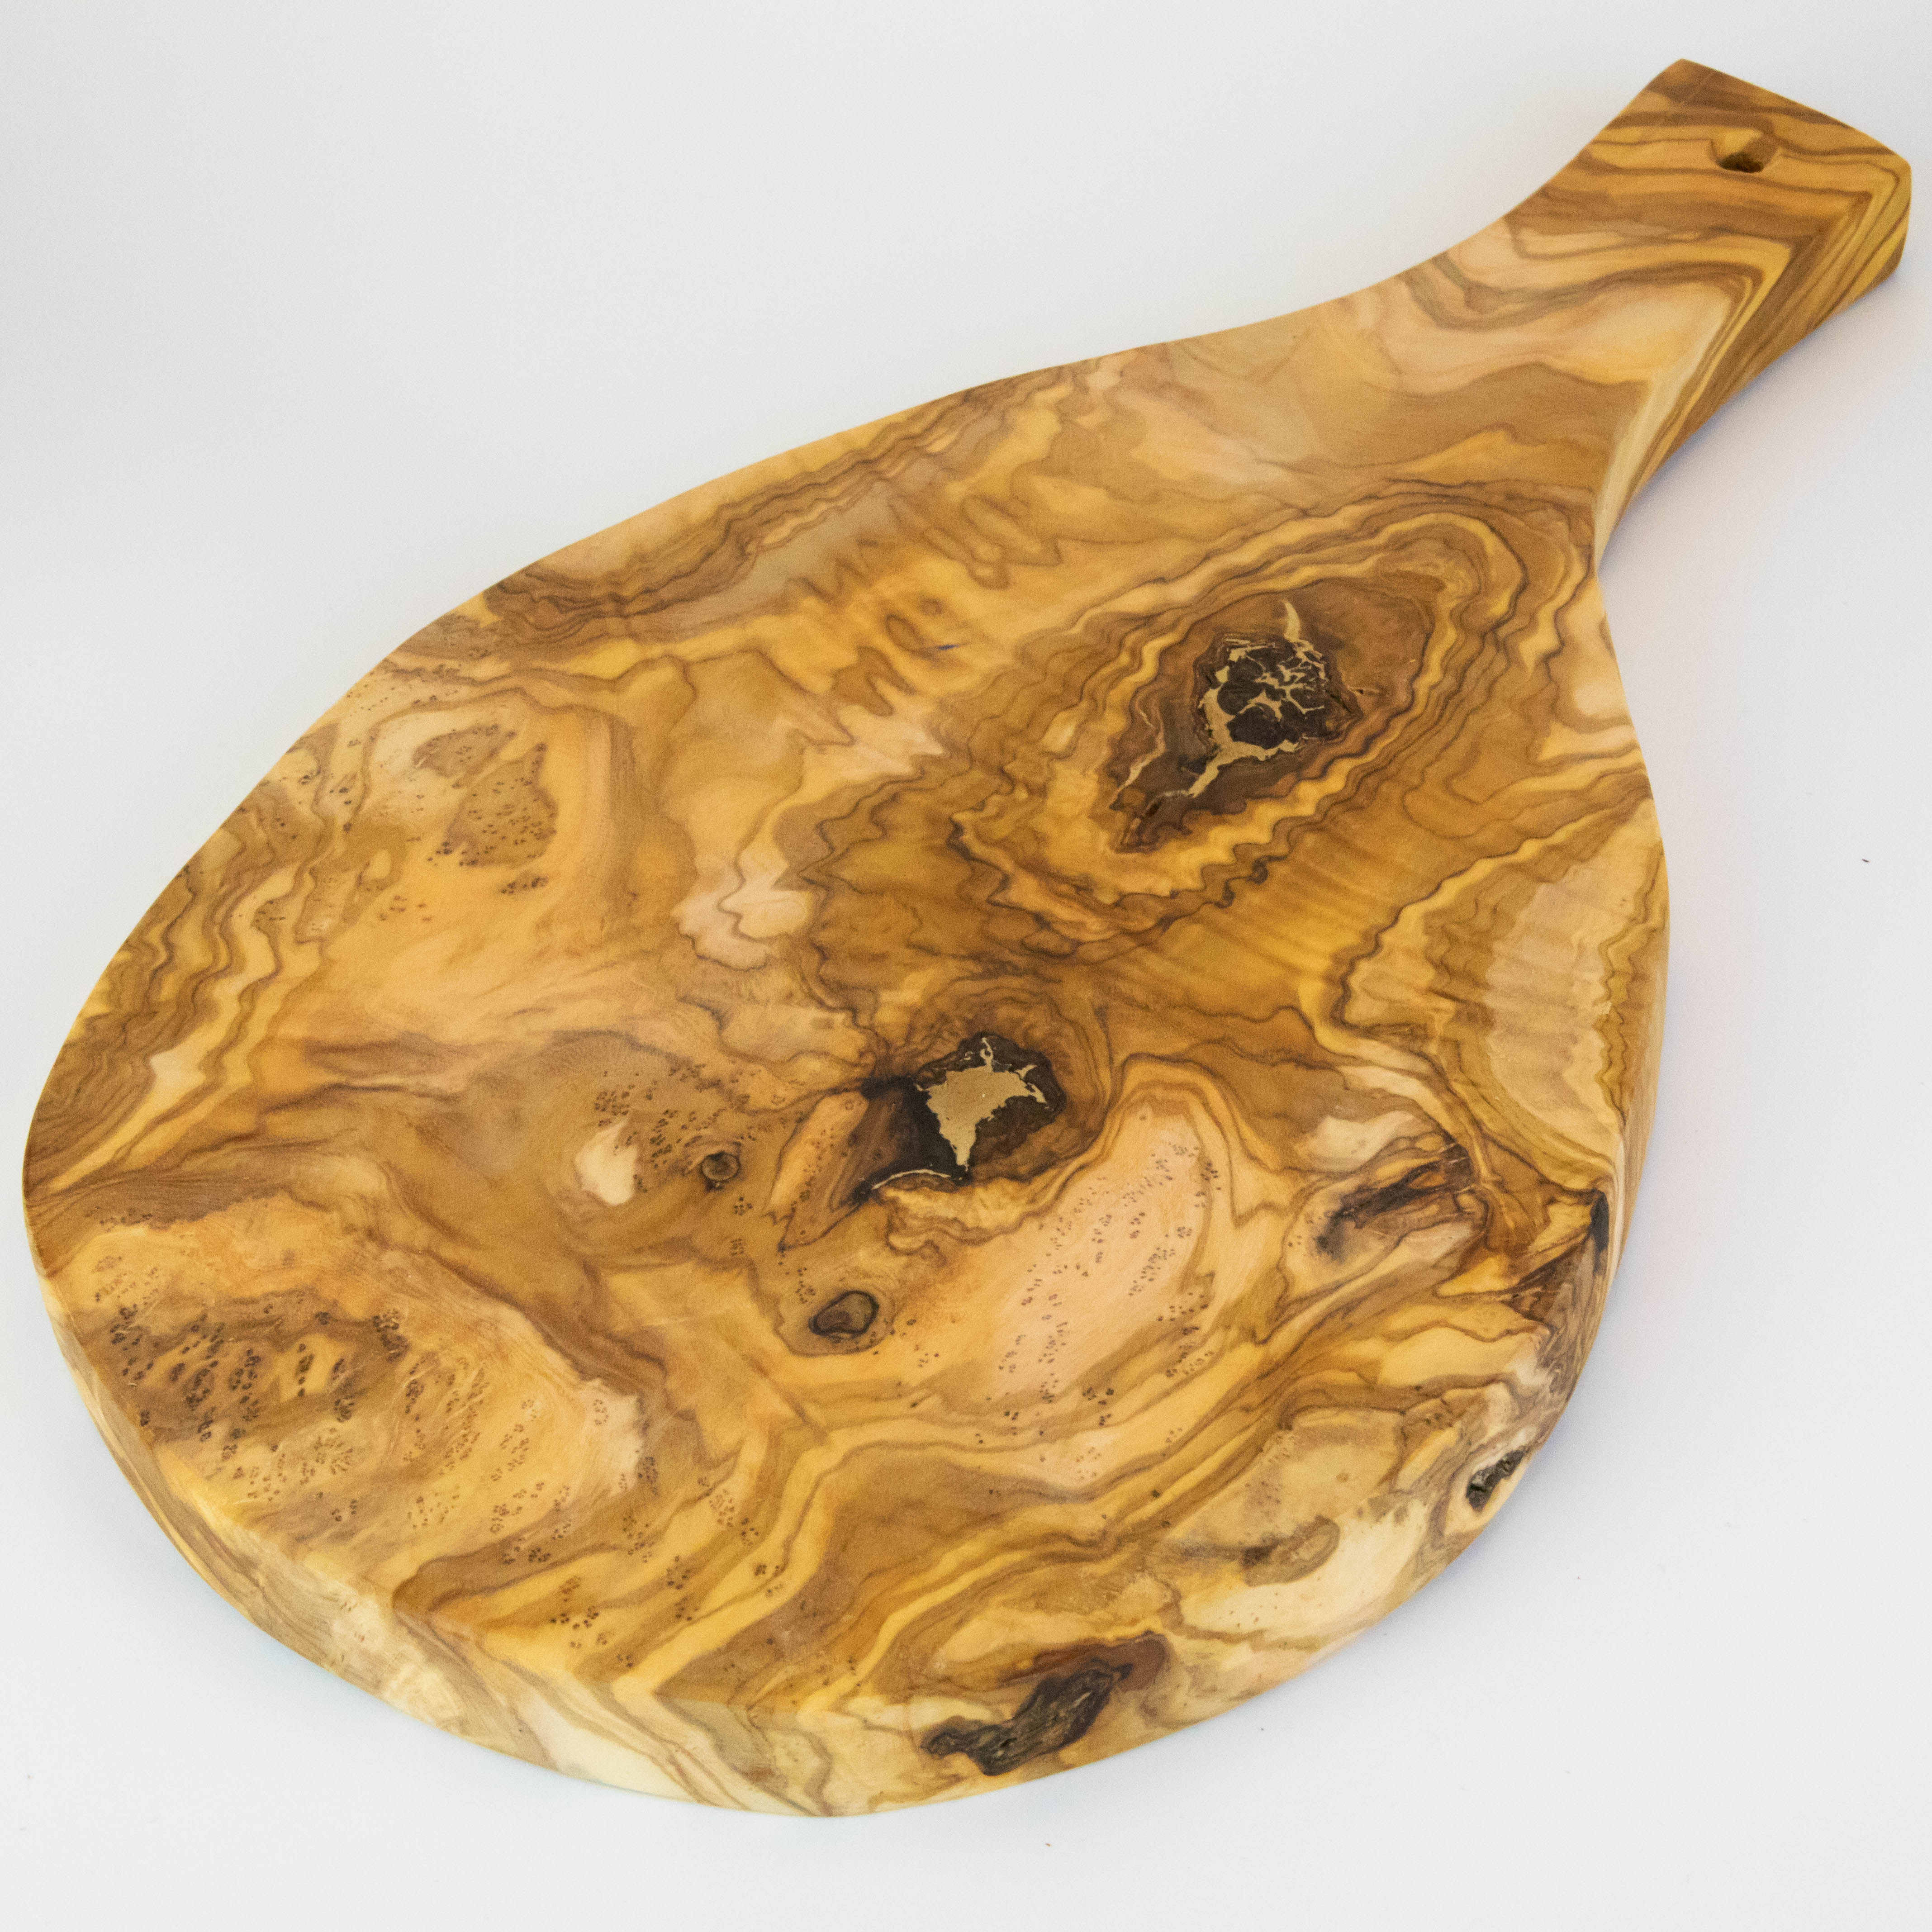 Rustic serving board with handle made of olive wood.